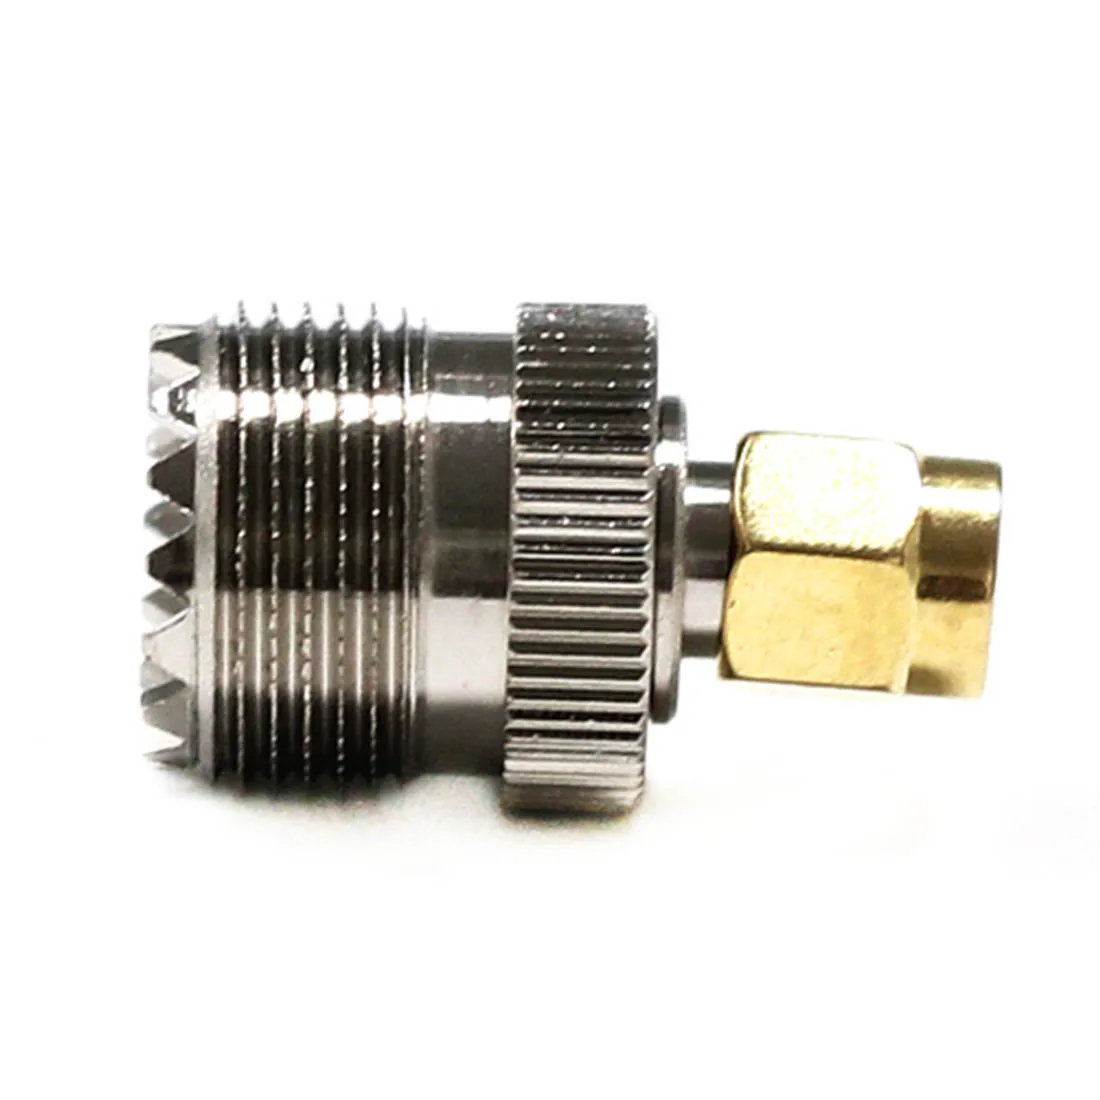 1pc New UHF Female Jack to SMA Male Plug RF Coax Adapter Modem Convertor Connector Straight Goldplated Wholesale